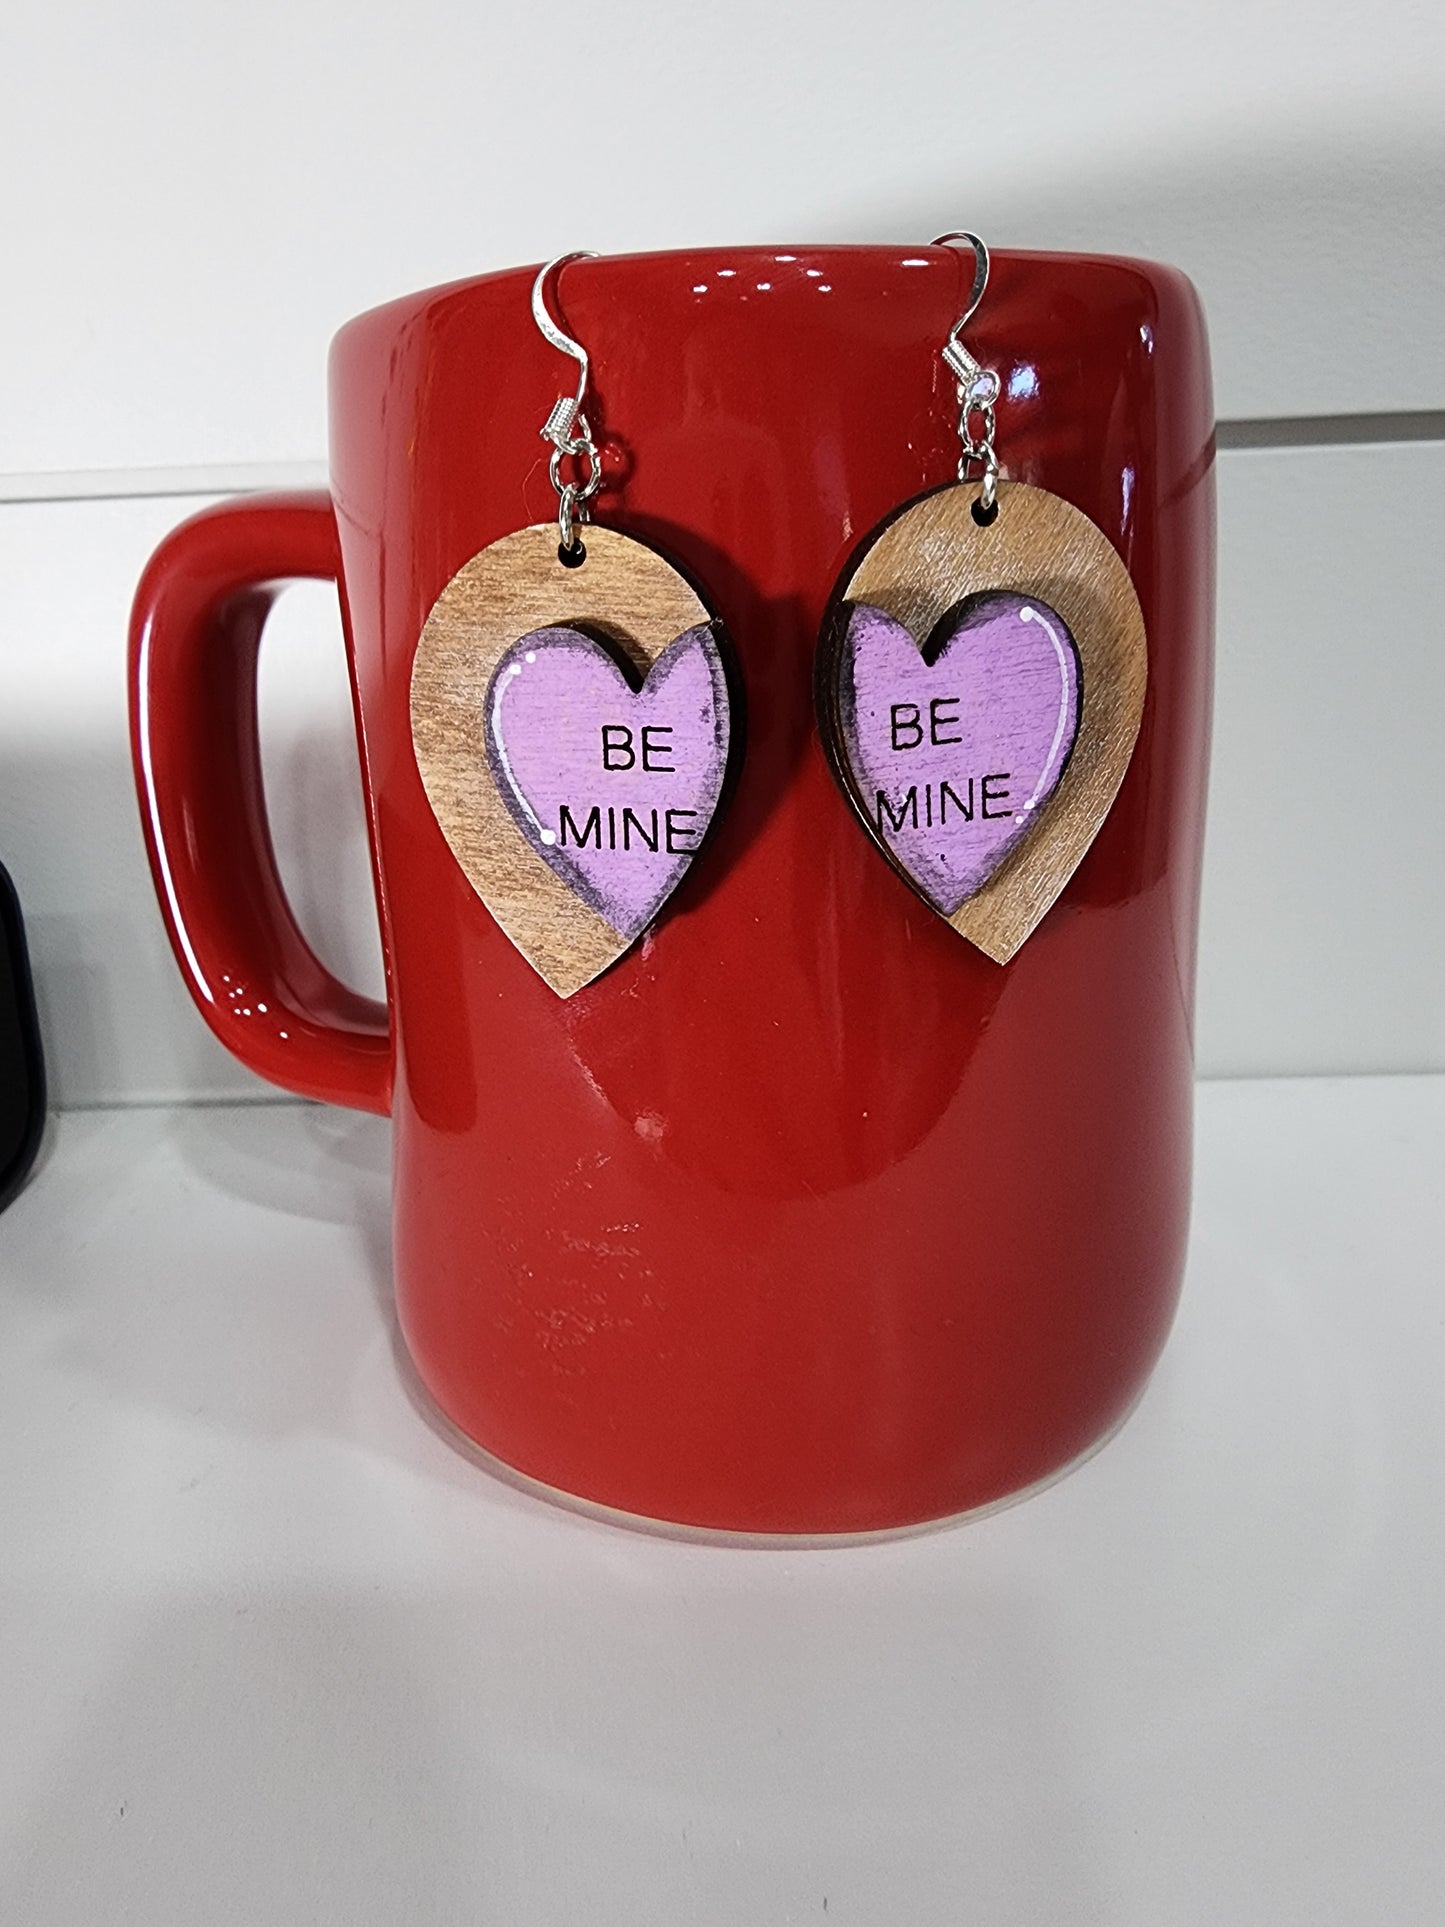 Be Mine . Earrings . Valentine's Day